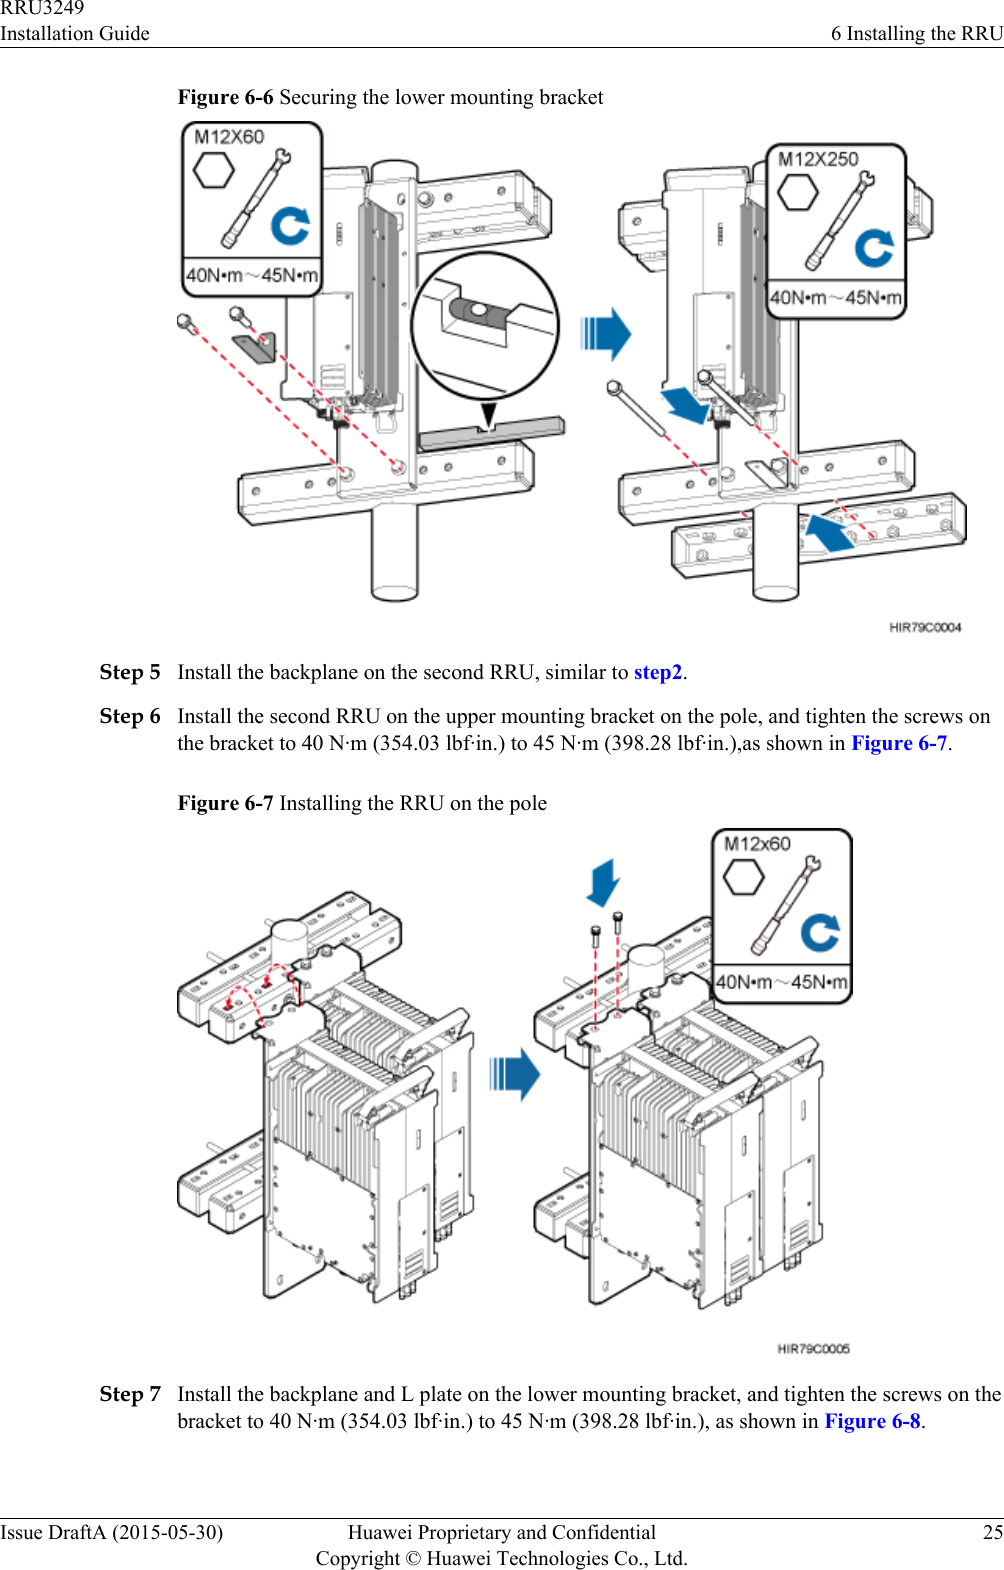 Figure 6-6 Securing the lower mounting bracketStep 5 Install the backplane on the second RRU, similar to step2.Step 6 Install the second RRU on the upper mounting bracket on the pole, and tighten the screws onthe bracket to 40 N·m (354.03 lbf·in.) to 45 N·m (398.28 lbf·in.),as shown in Figure 6-7.Figure 6-7 Installing the RRU on the poleStep 7 Install the backplane and L plate on the lower mounting bracket, and tighten the screws on thebracket to 40 N·m (354.03 lbf·in.) to 45 N·m (398.28 lbf·in.), as shown in Figure 6-8.RRU3249Installation Guide 6 Installing the RRUIssue DraftA (2015-05-30) Huawei Proprietary and ConfidentialCopyright © Huawei Technologies Co., Ltd.25